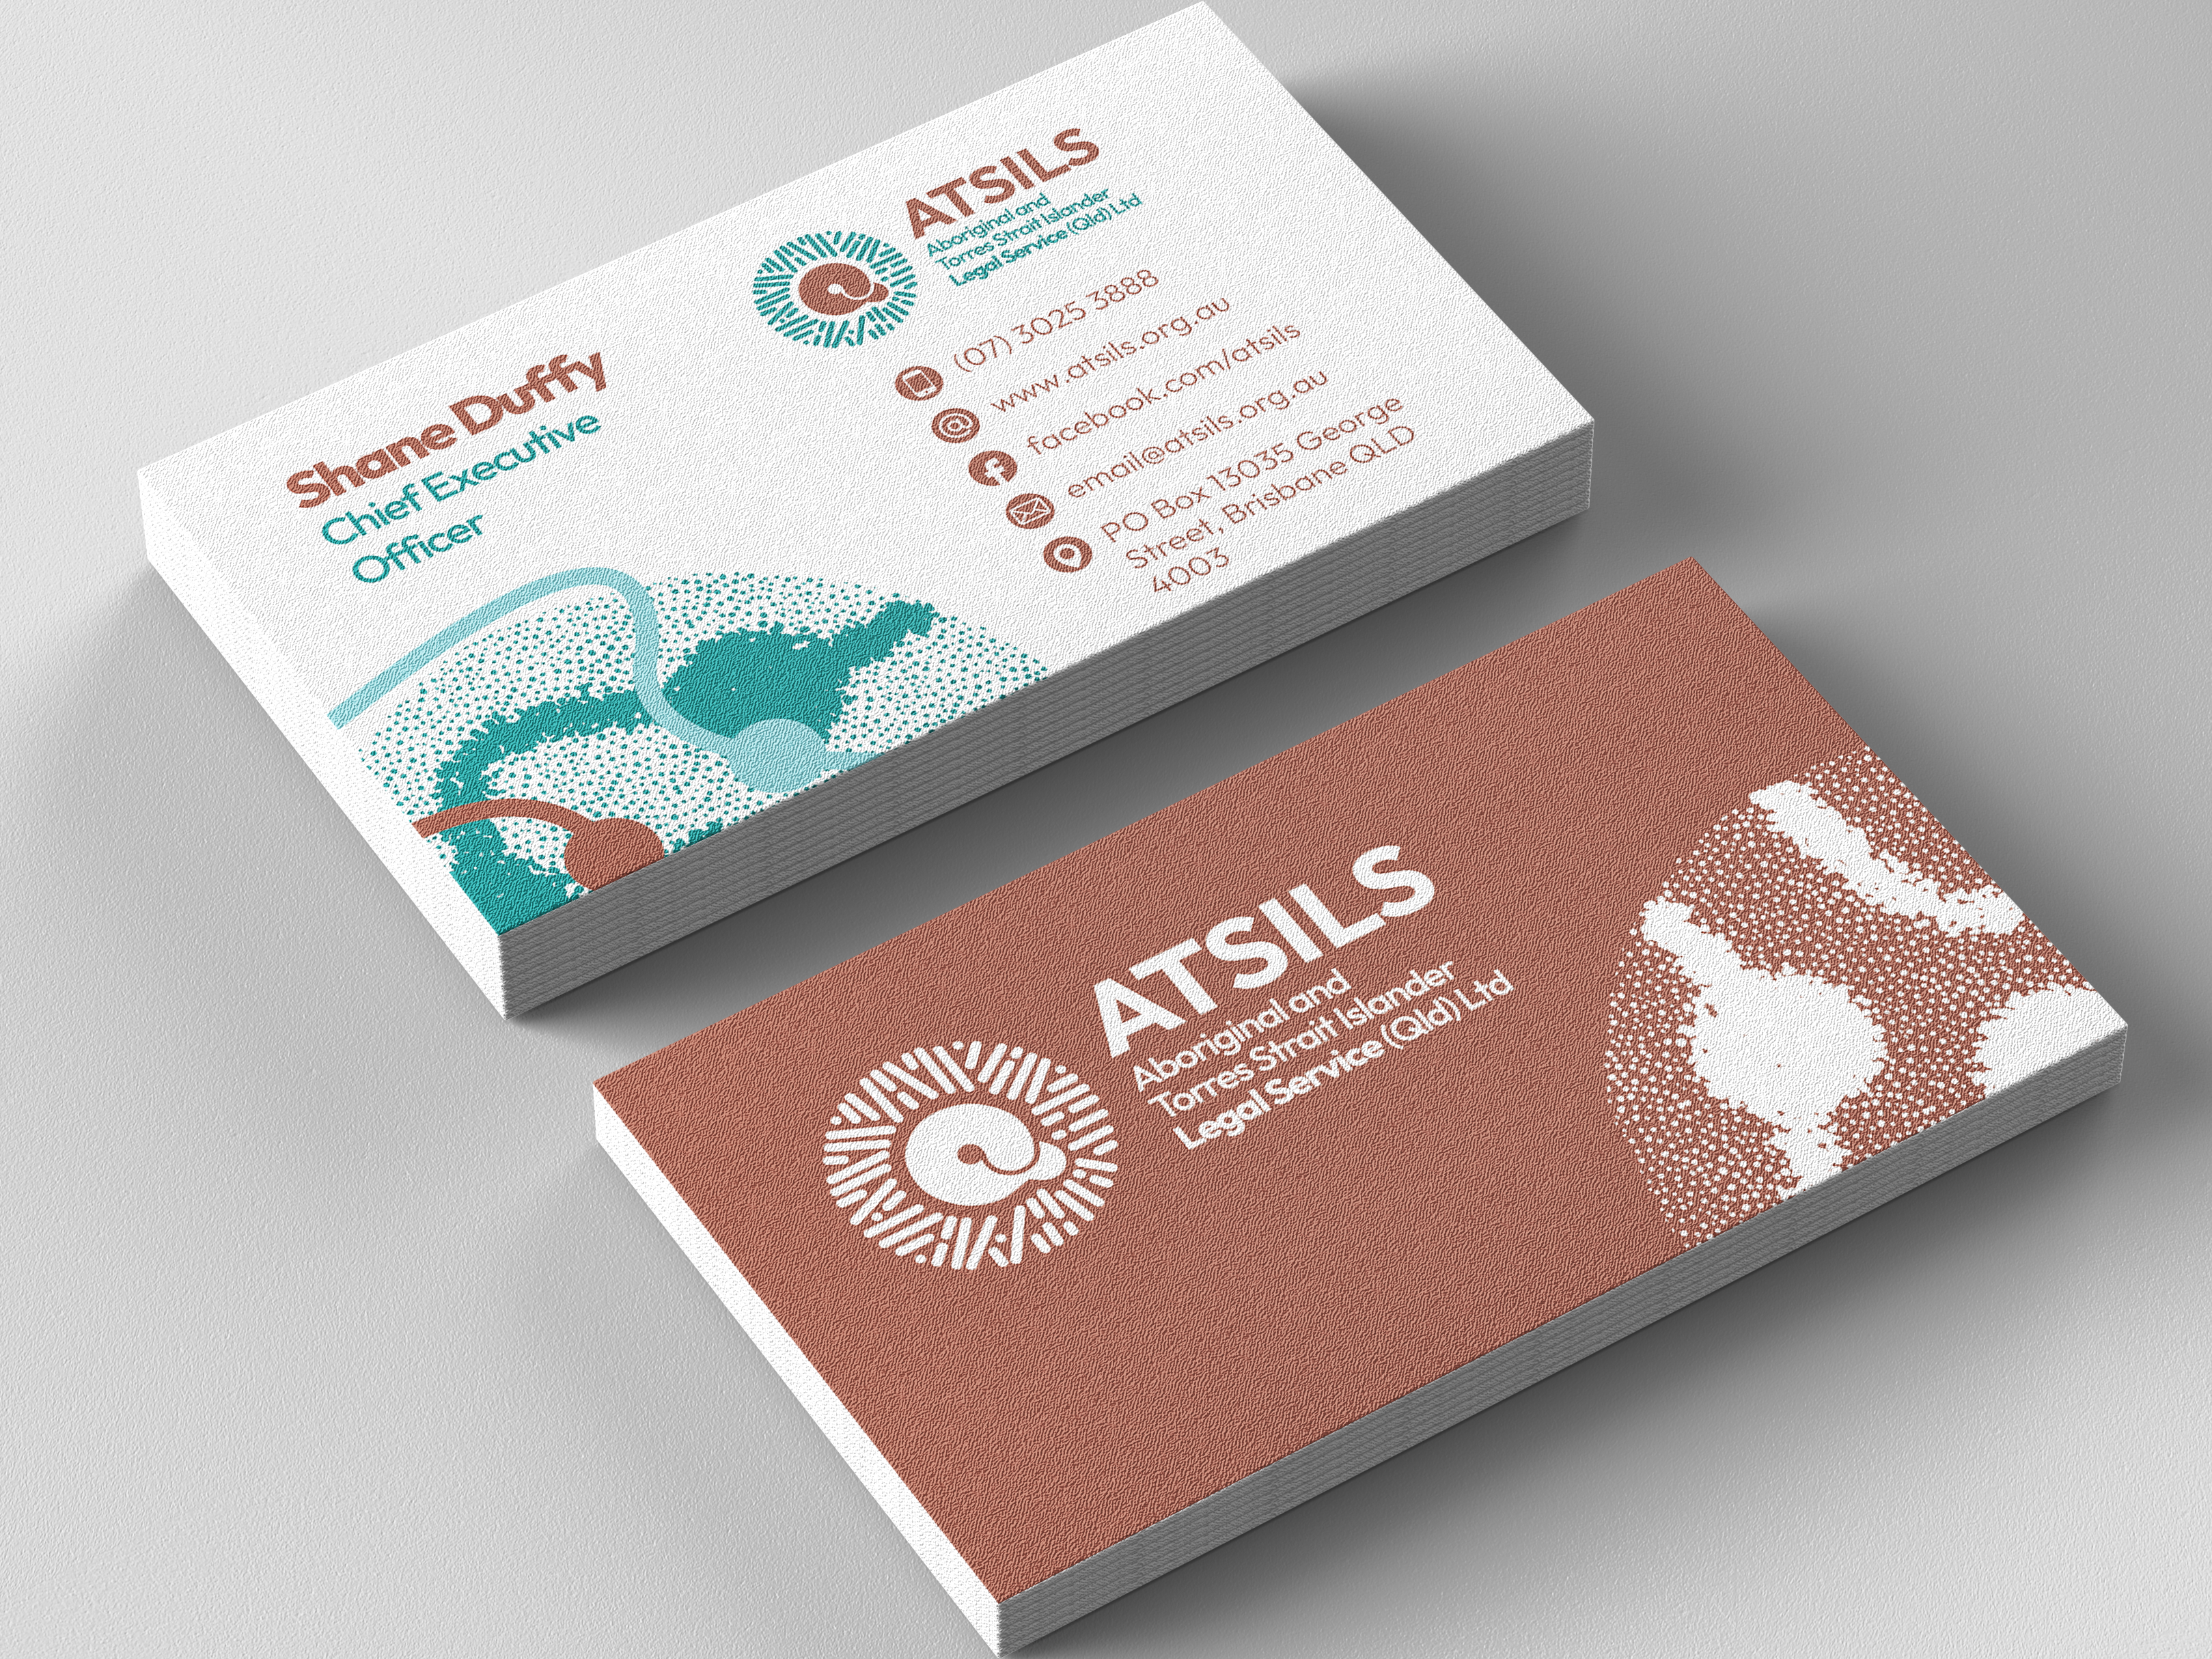 Mock up of a business card for ATSILS image shows front and back of the card